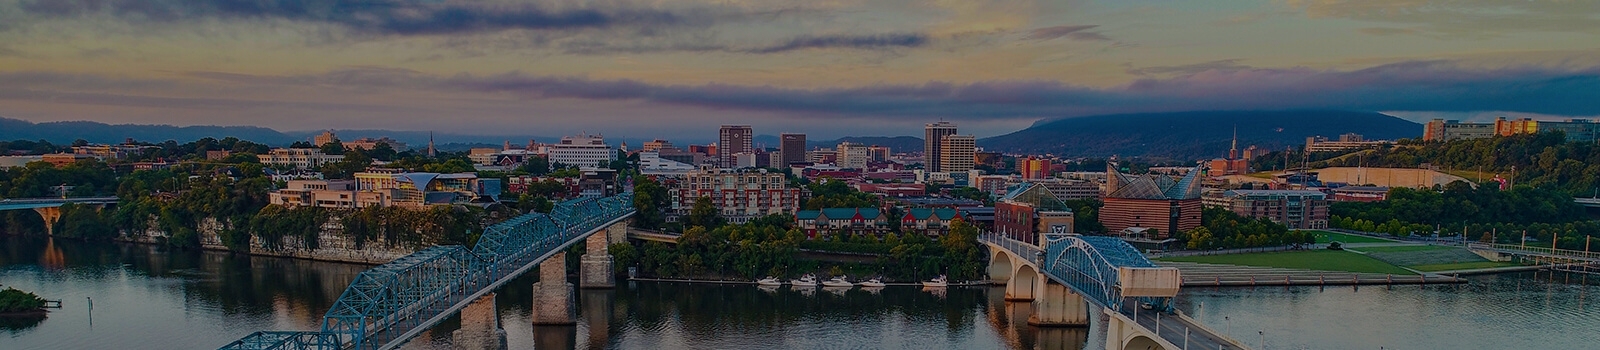 Tennessee Cityscape